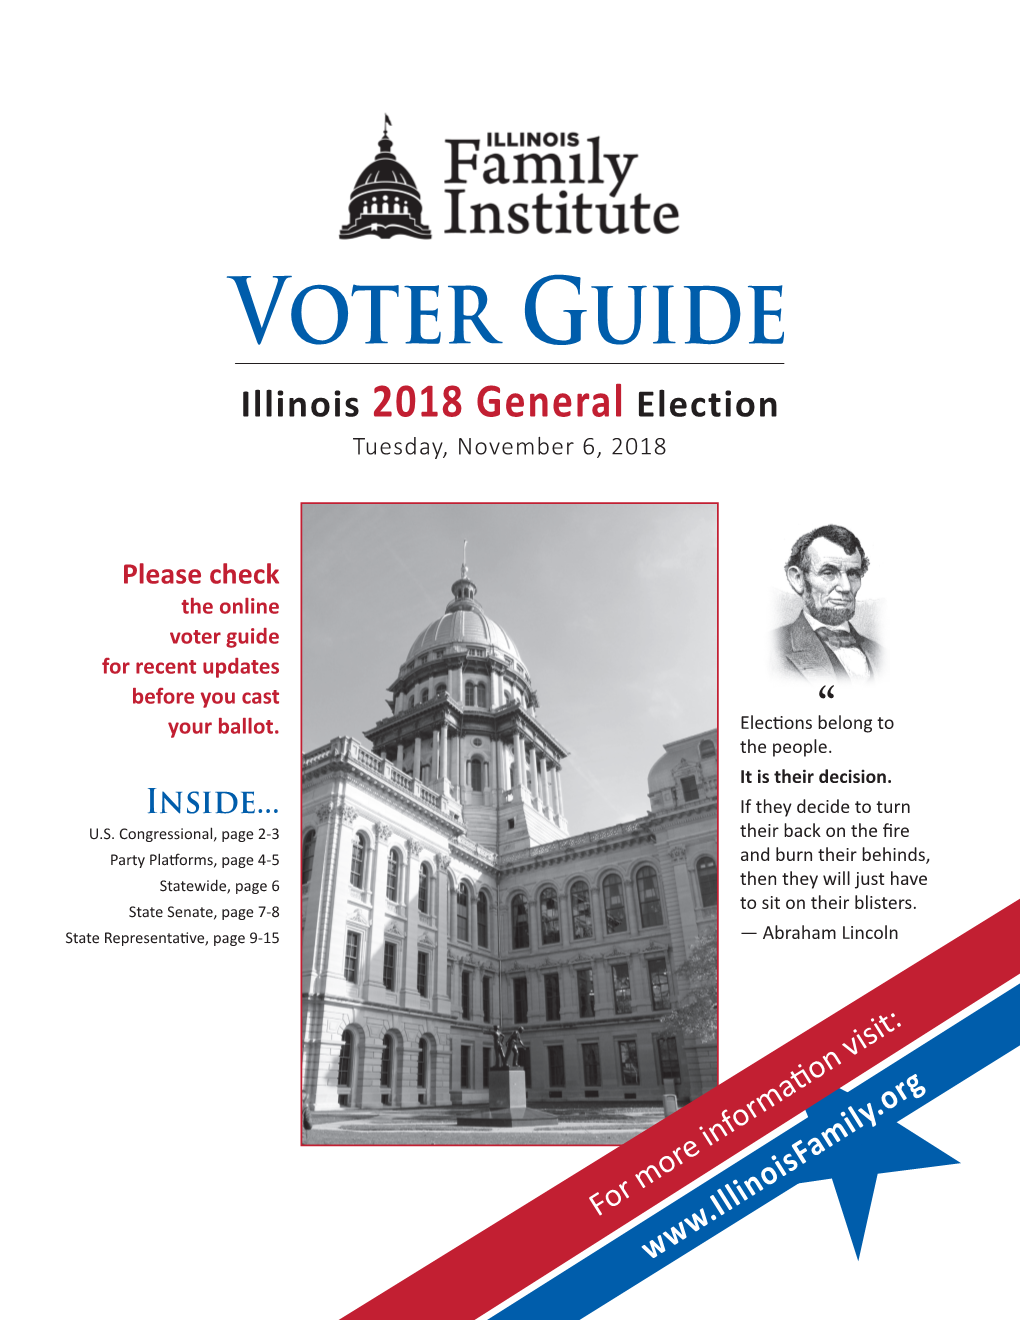 Online Voter Guide for Recent Updates Before You Cast Your Ballot